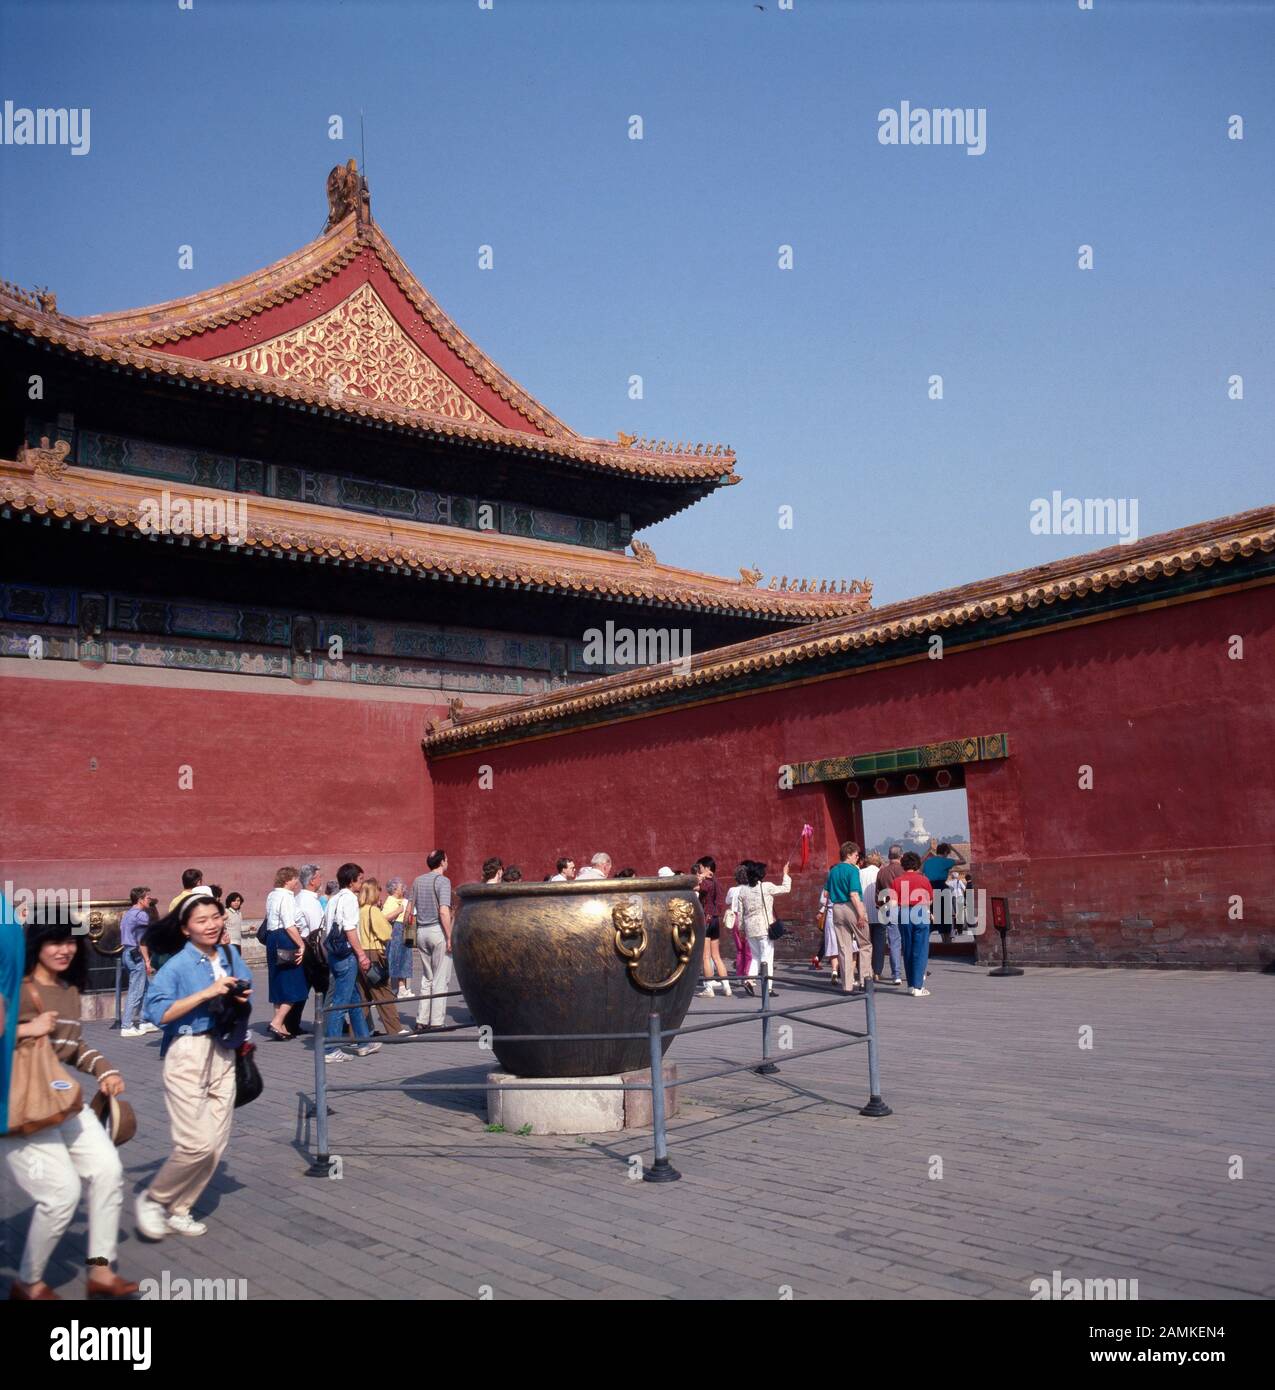 Vor dem Kaiserpalast in der Verbotenen Stadt in Peking, China 1980er Jahre. In front of Emperor's palace at the Forbidden City in Beijing, China 1980s. Stock Photo